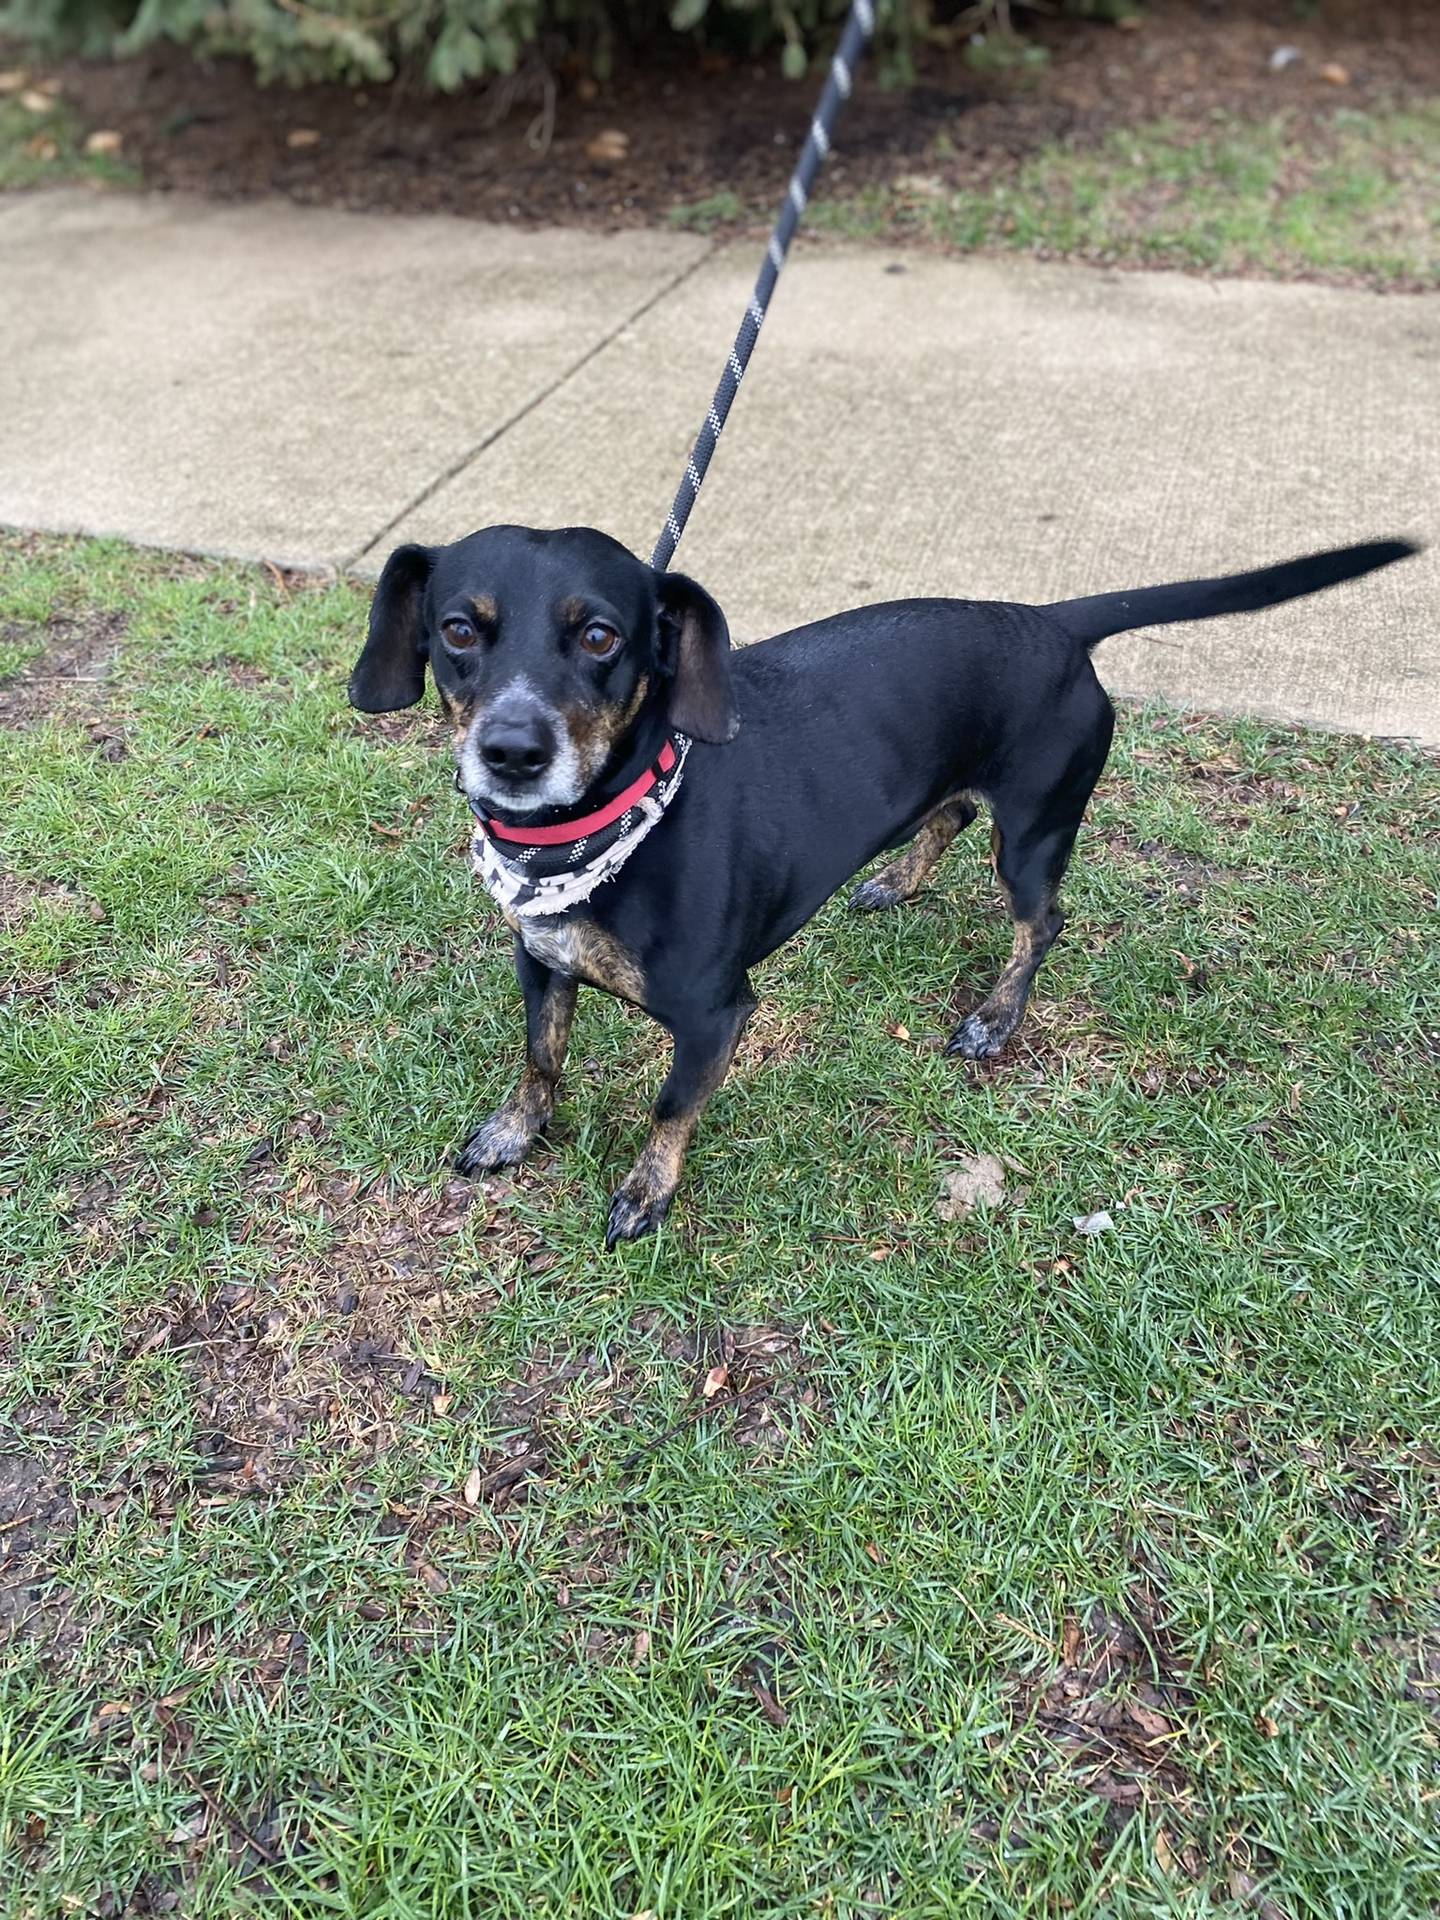 Dexter is a 7-year-old male dachshund mix. He is affectionate, spunky and outgoing. He loves attention from people and gets along with other dogs. To meet Dexter, email Victoria at victoria@nawsus.org. Visit nawsus.org.